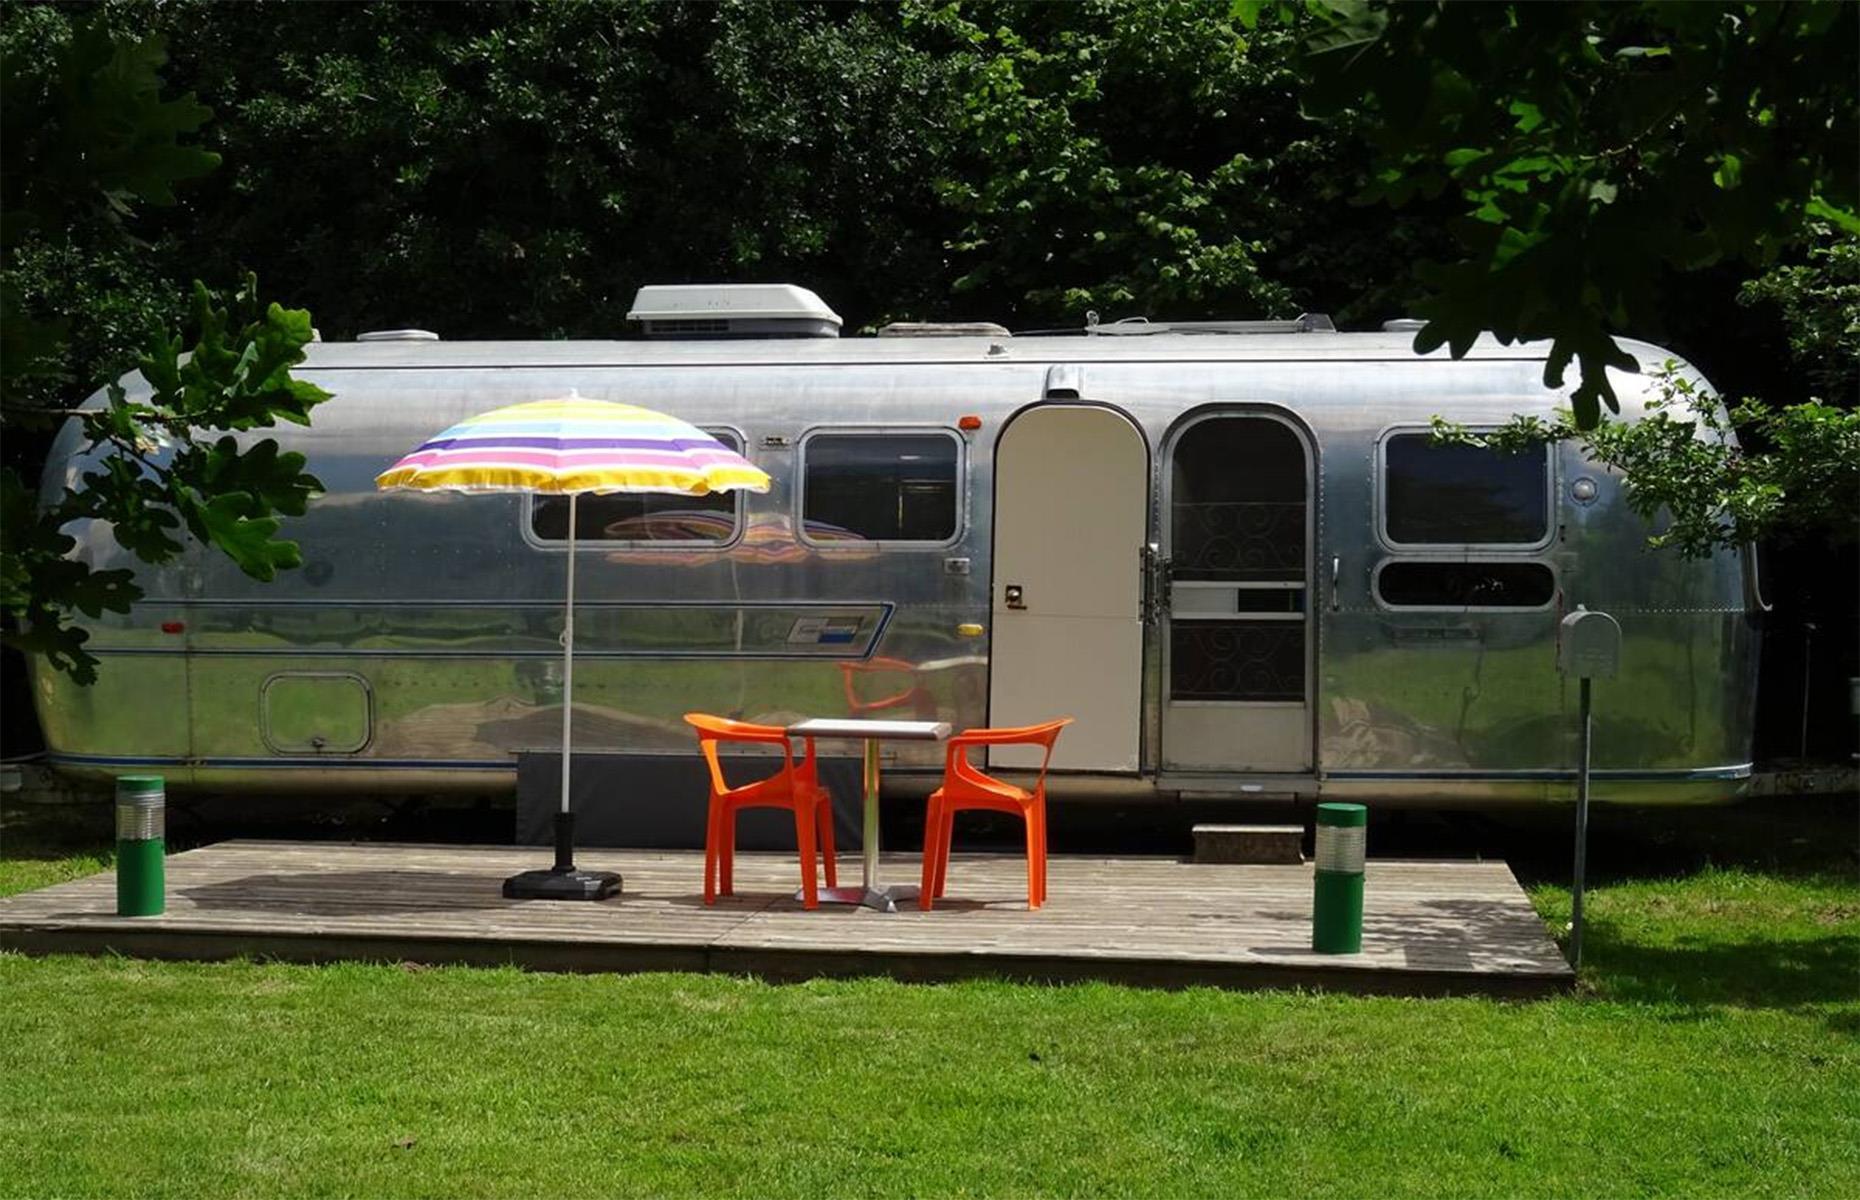 <p>These days, Airstreams don't mean slumming it on a barren strip of land. They're now the first choice of glampers and Instagram influencers – think stylish, cosy and comfortable.</p>  <p>We reveal the story behind the brand and take a look at the best Airstream refurbs and designs to inspire you to take the road in your own tiny home on wheels. Click or scroll on for more...</p>  <p>All dollar values in US dollars.</p>